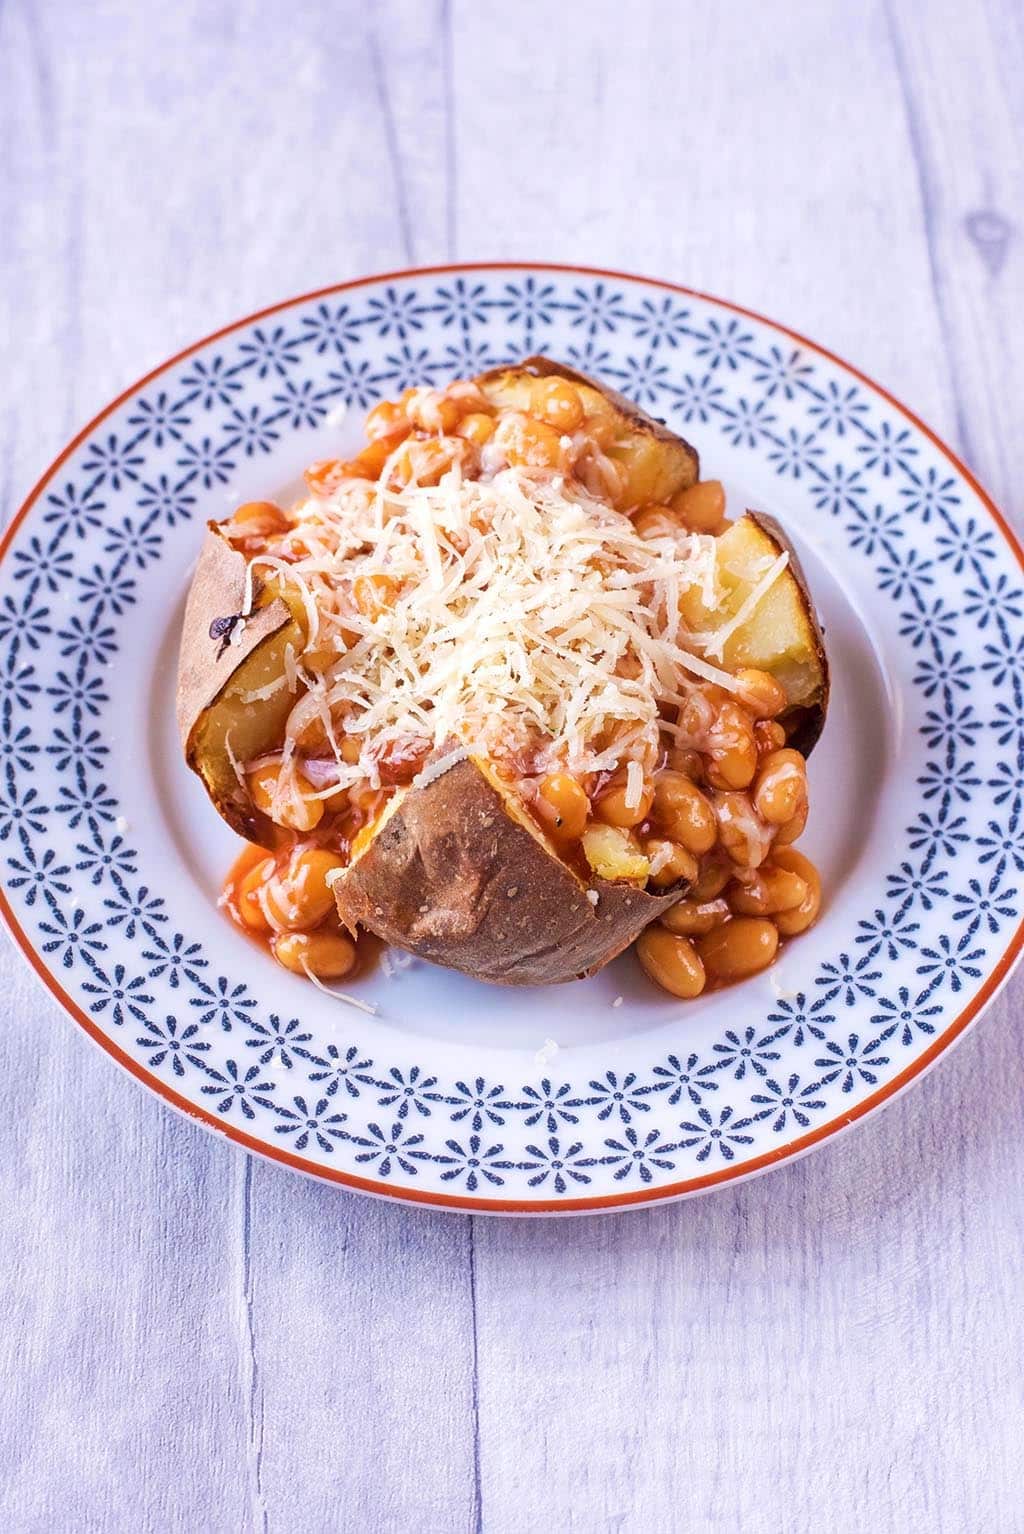 Baked Potato topped with Baked Beans and Cheddar on a patterned plate.